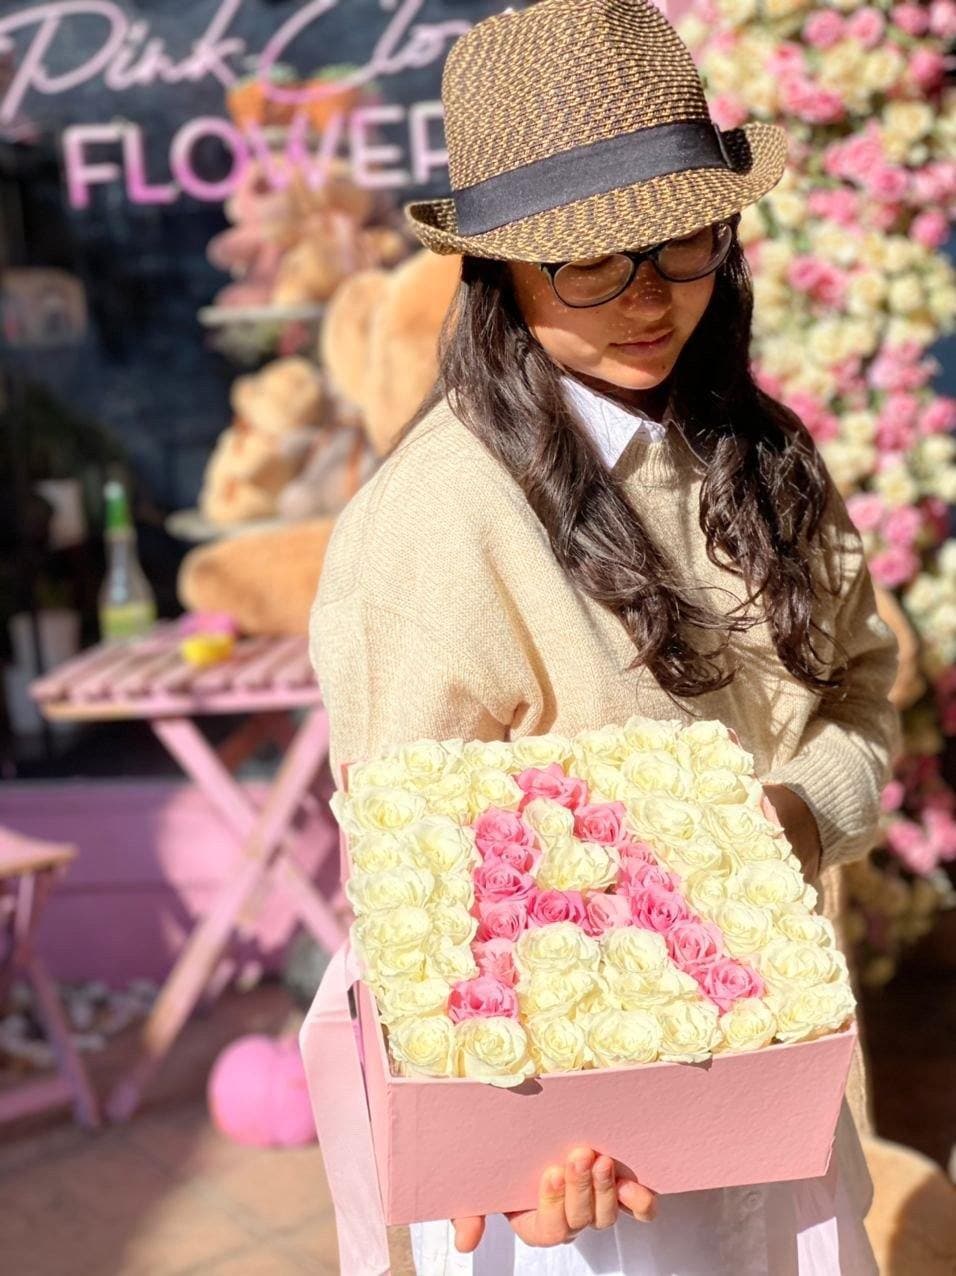 Flower box with your initials of your choice - Los Angeles Florist - Pink Clover